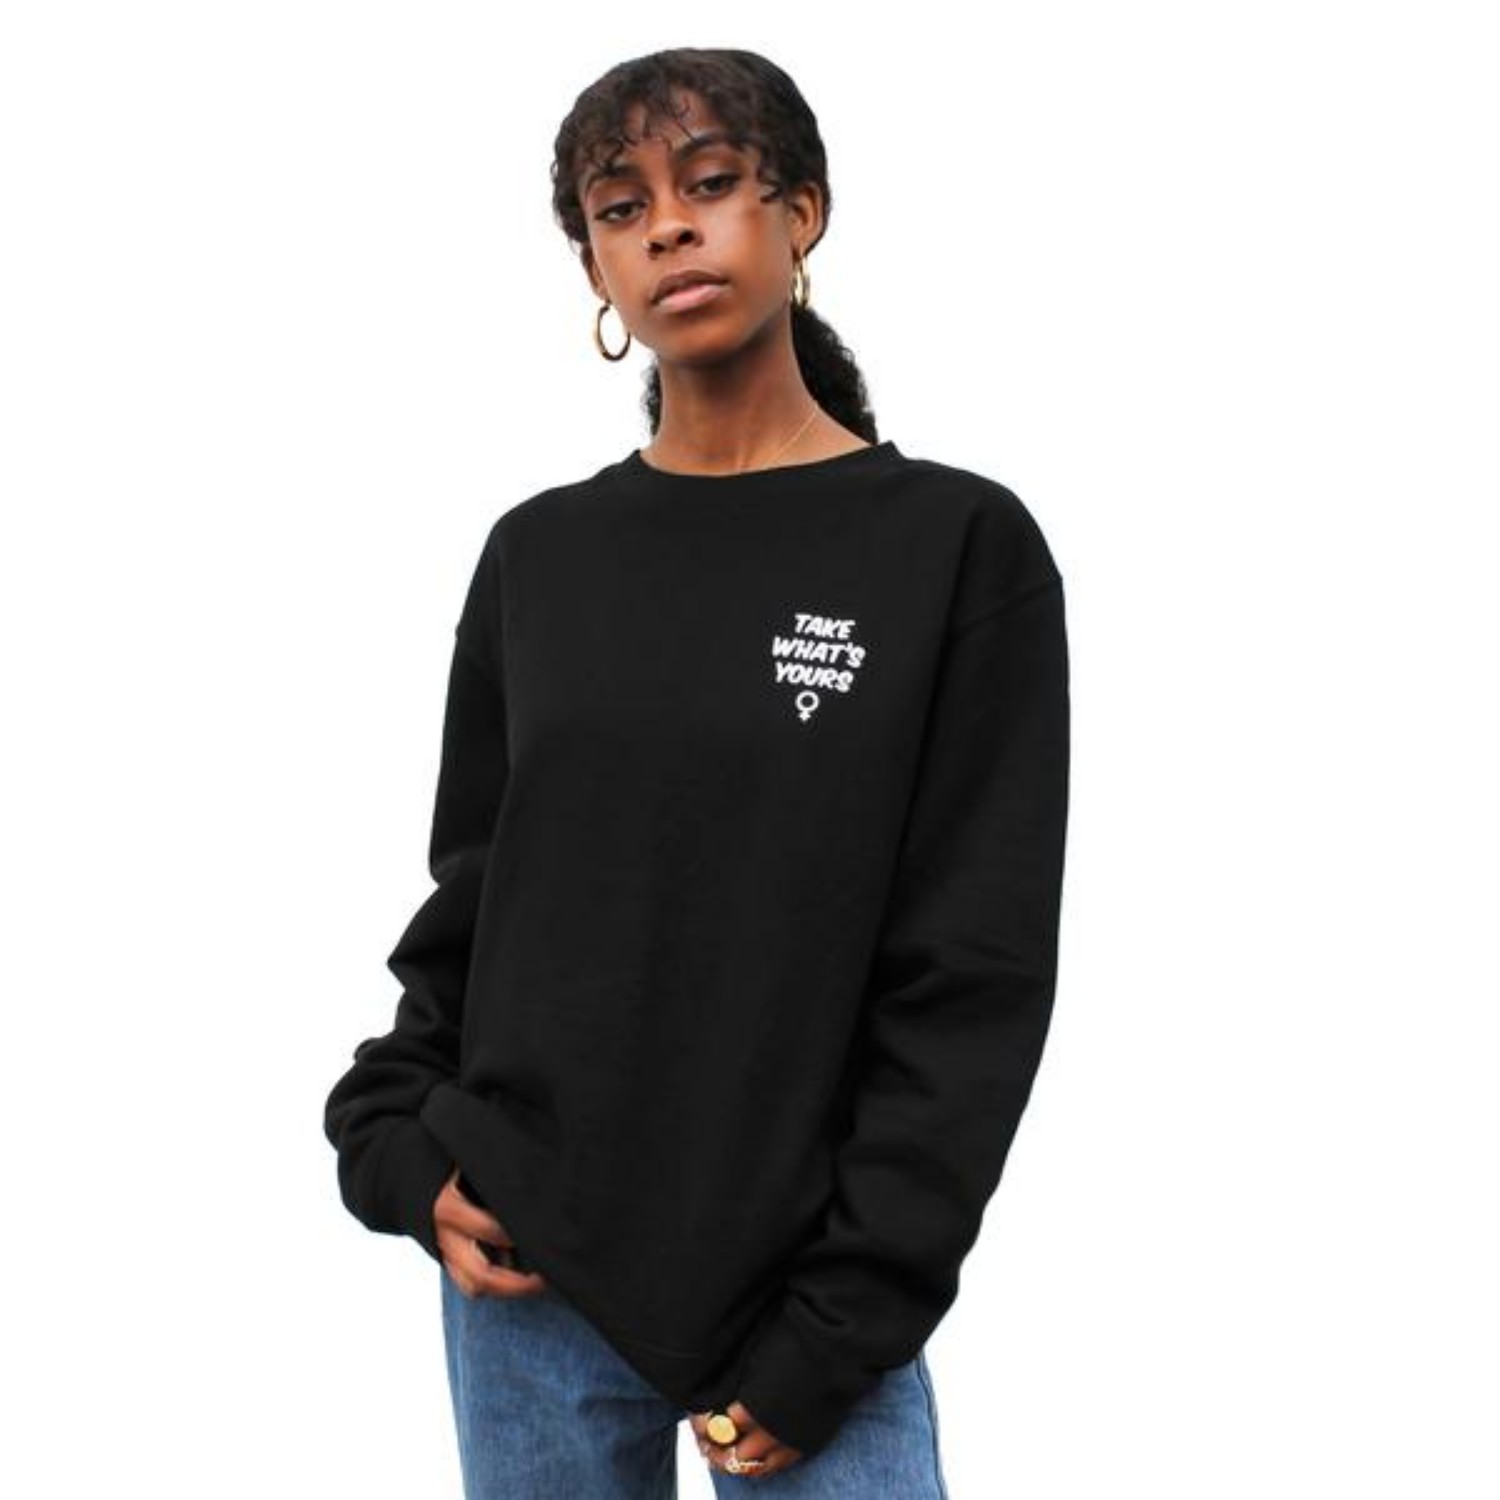 Melody Ehsani Drops 'World Is Yours' Capsule For Women's History Month